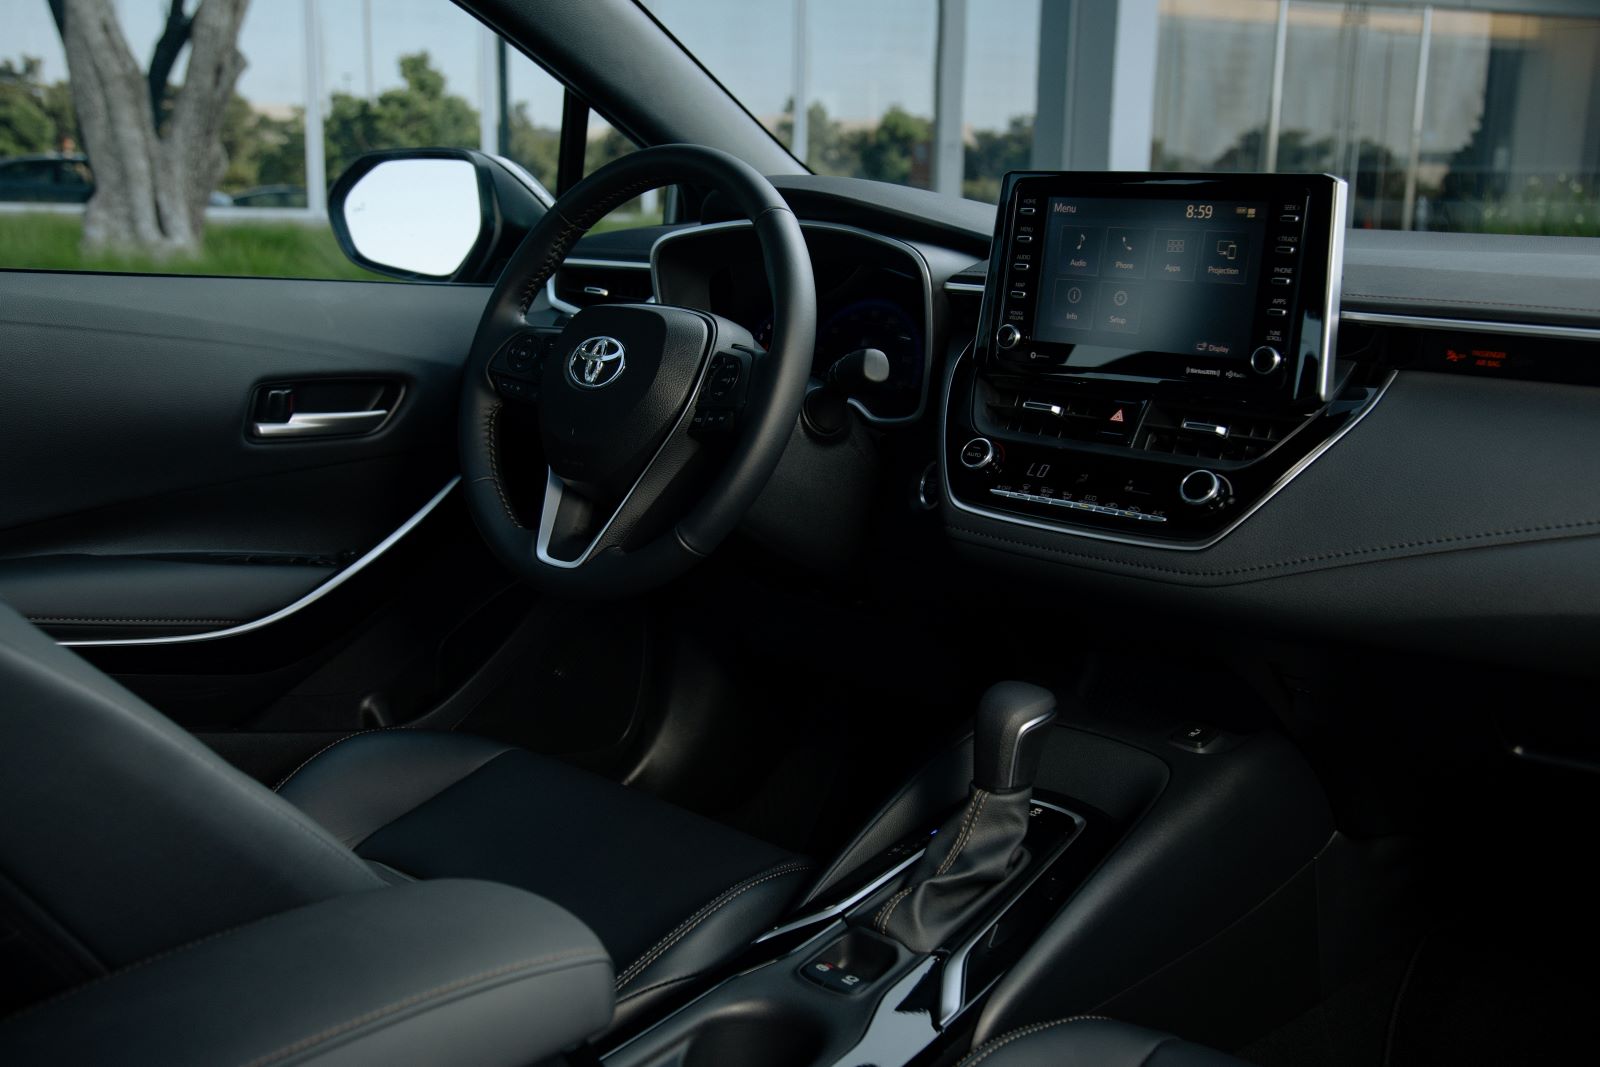 Interior shot of a 2022 Toyota Corolla, one of the best rental cars